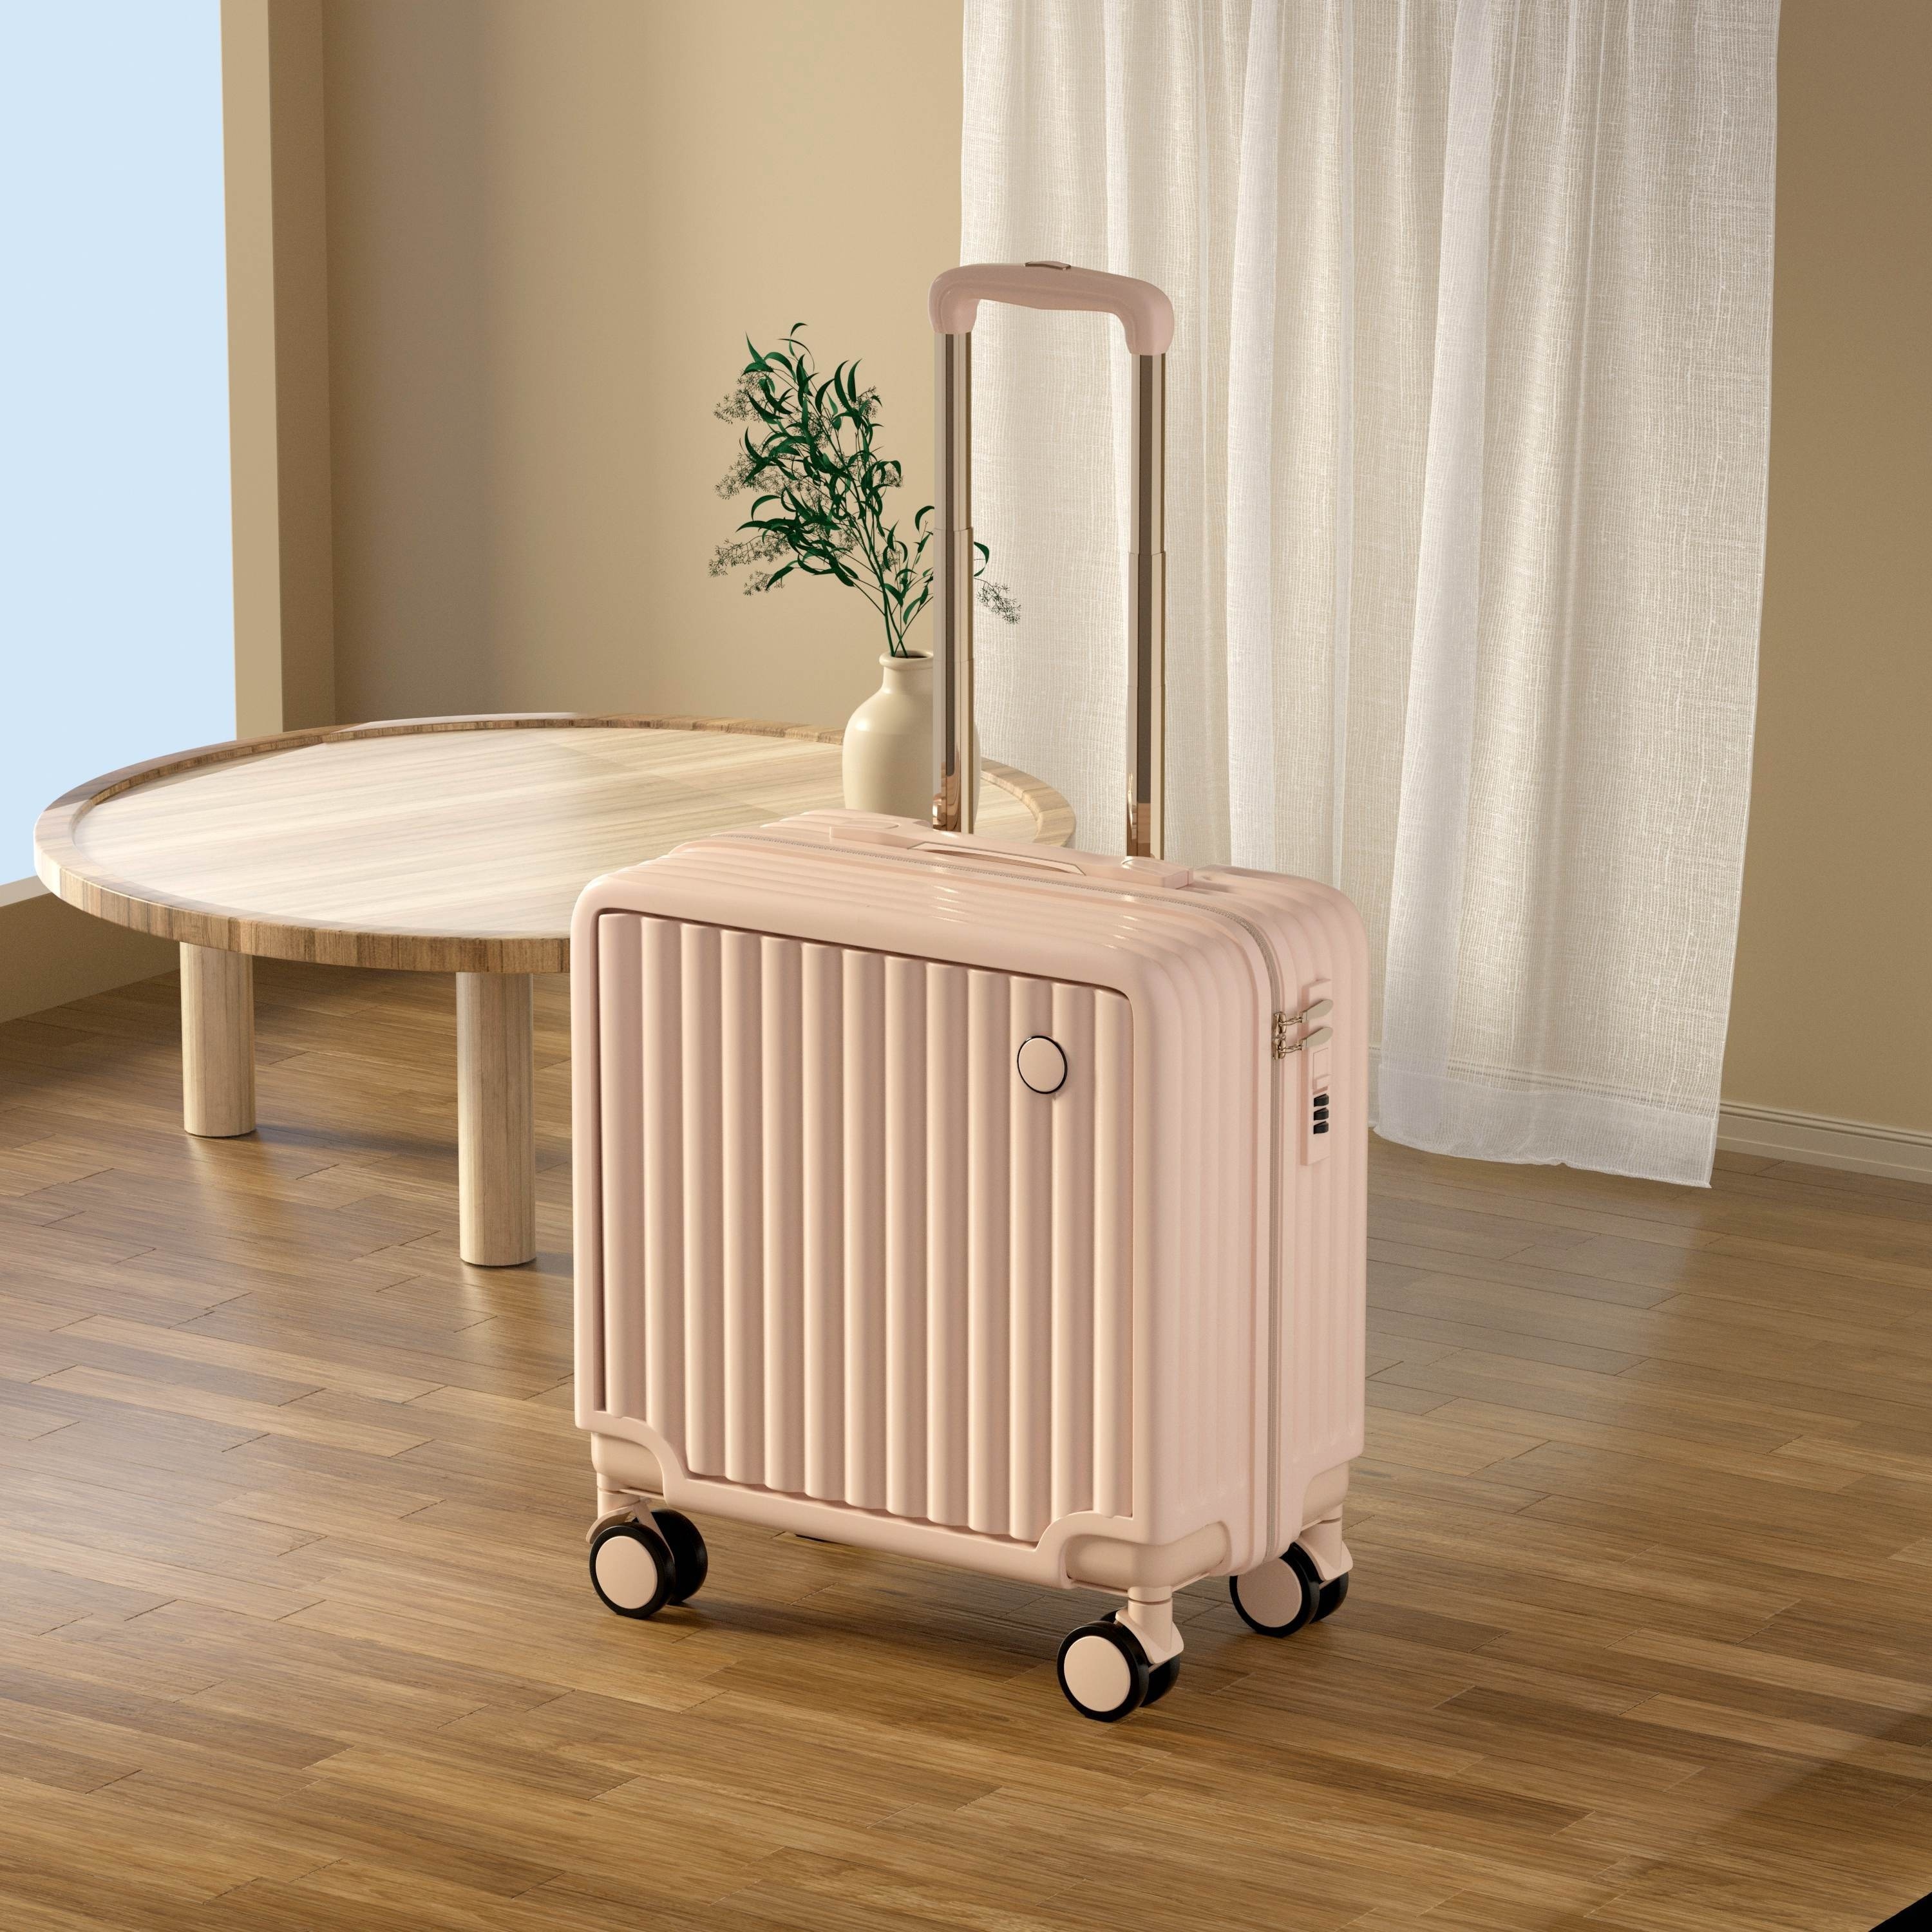 

18-inch Solid Color Simple Suitcase, Business Lightweight Trolley Case, Thickened Suitcase With Caster Wheels